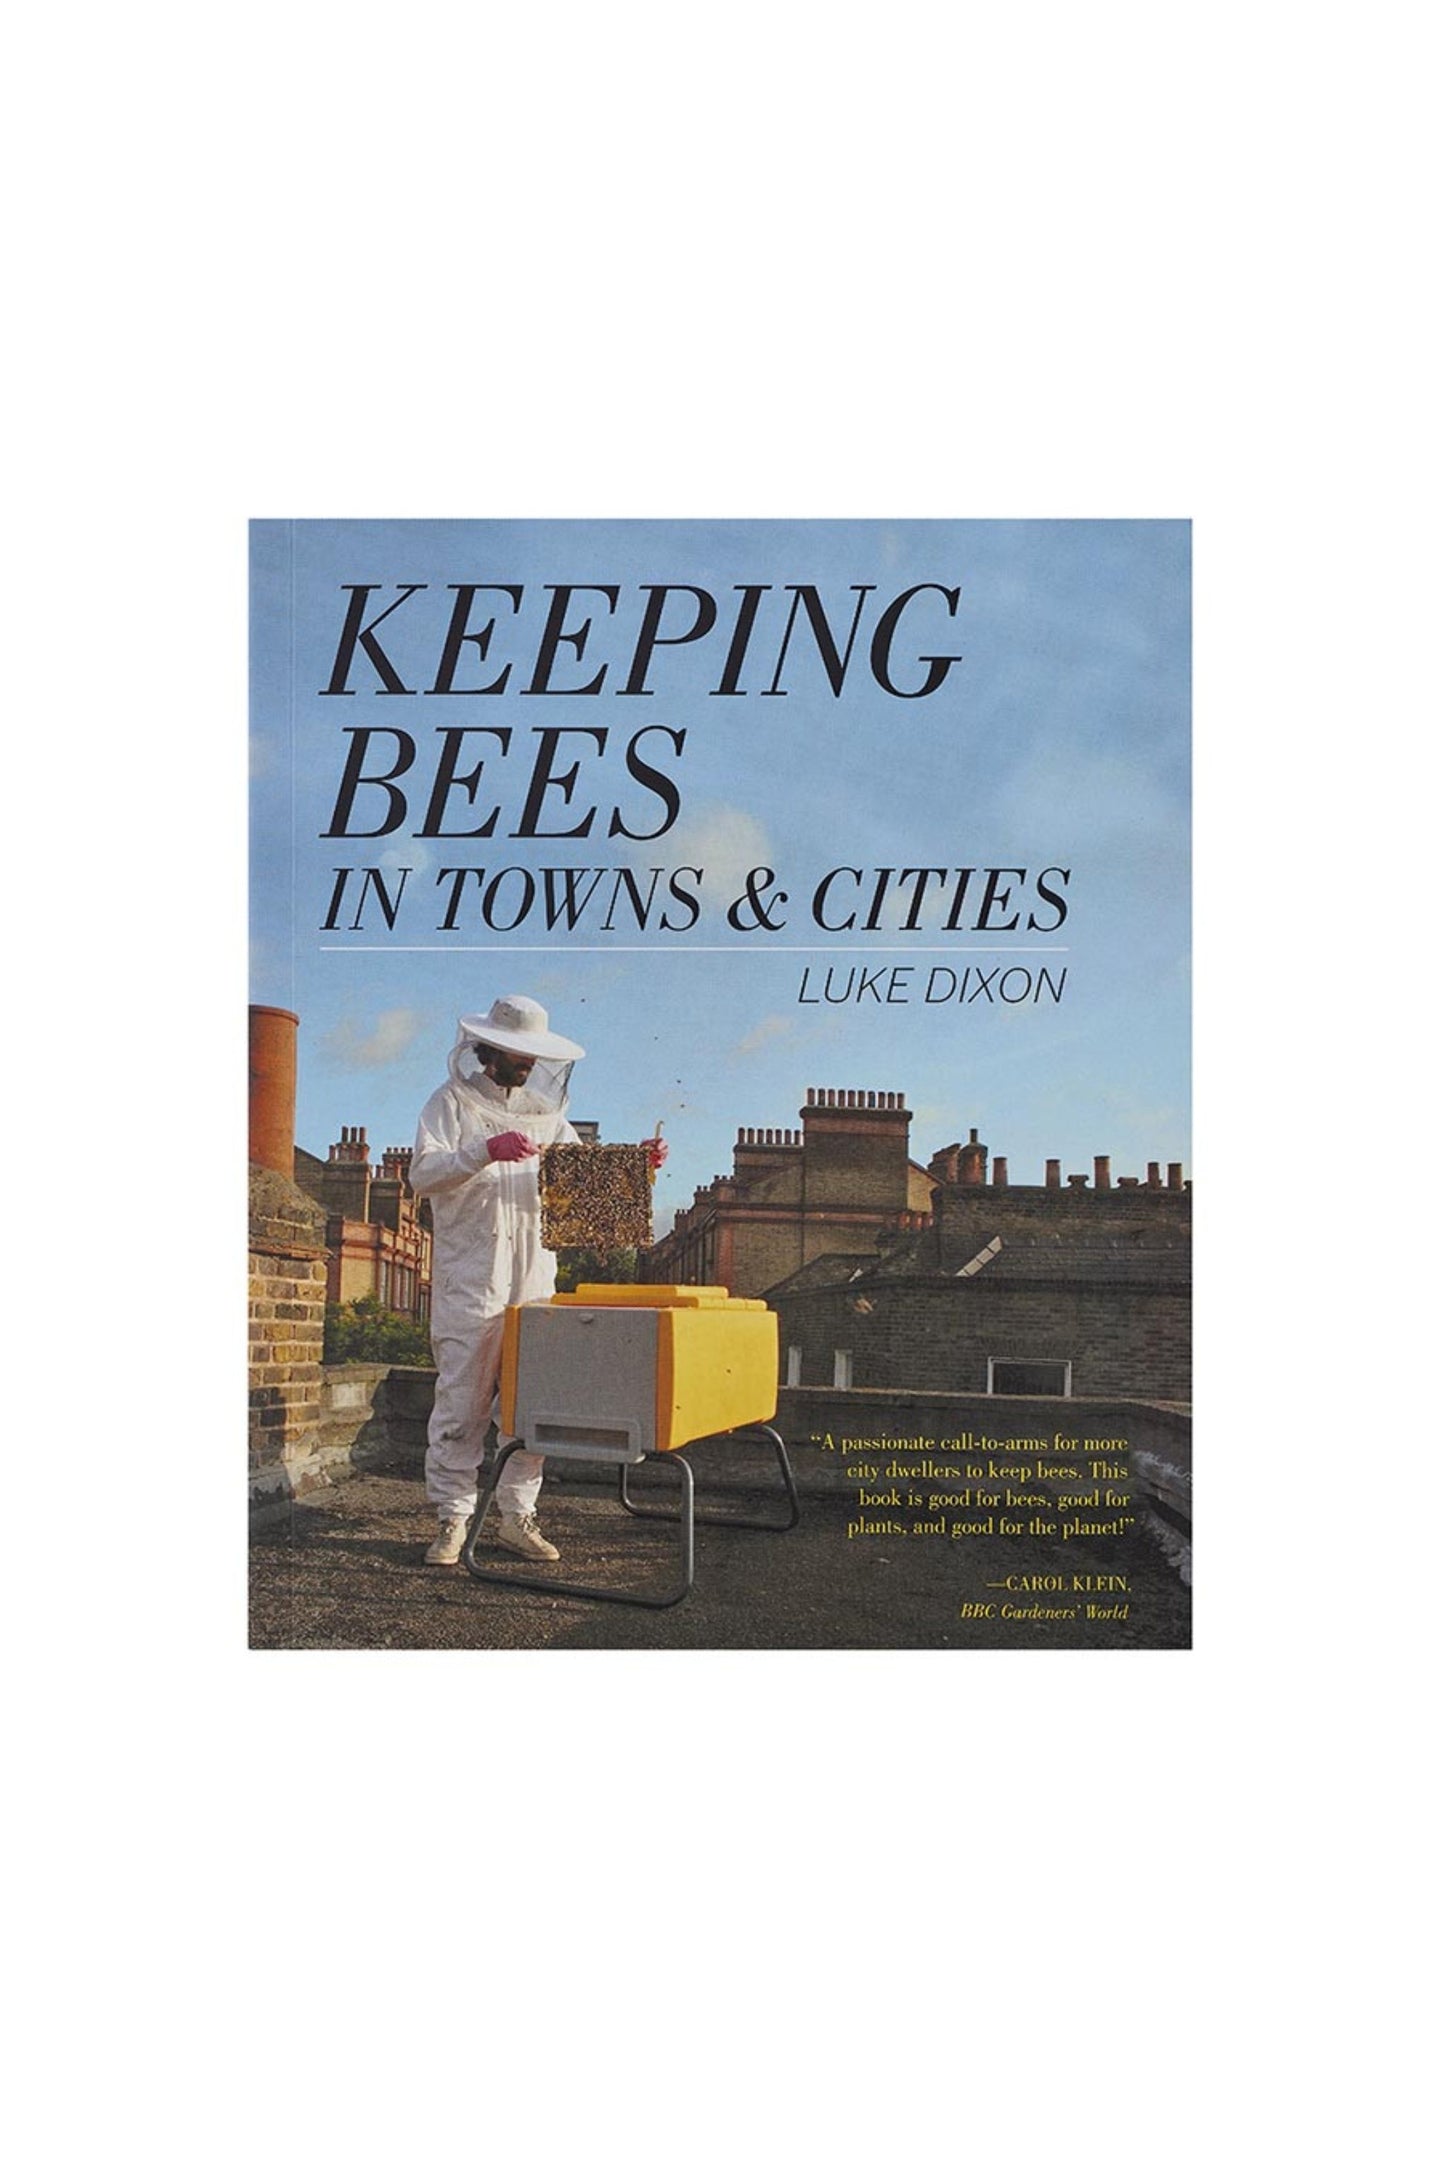 Book:  Keeping Bees in Towns & Cities with a beekeeper on a roof in a city on the cover..